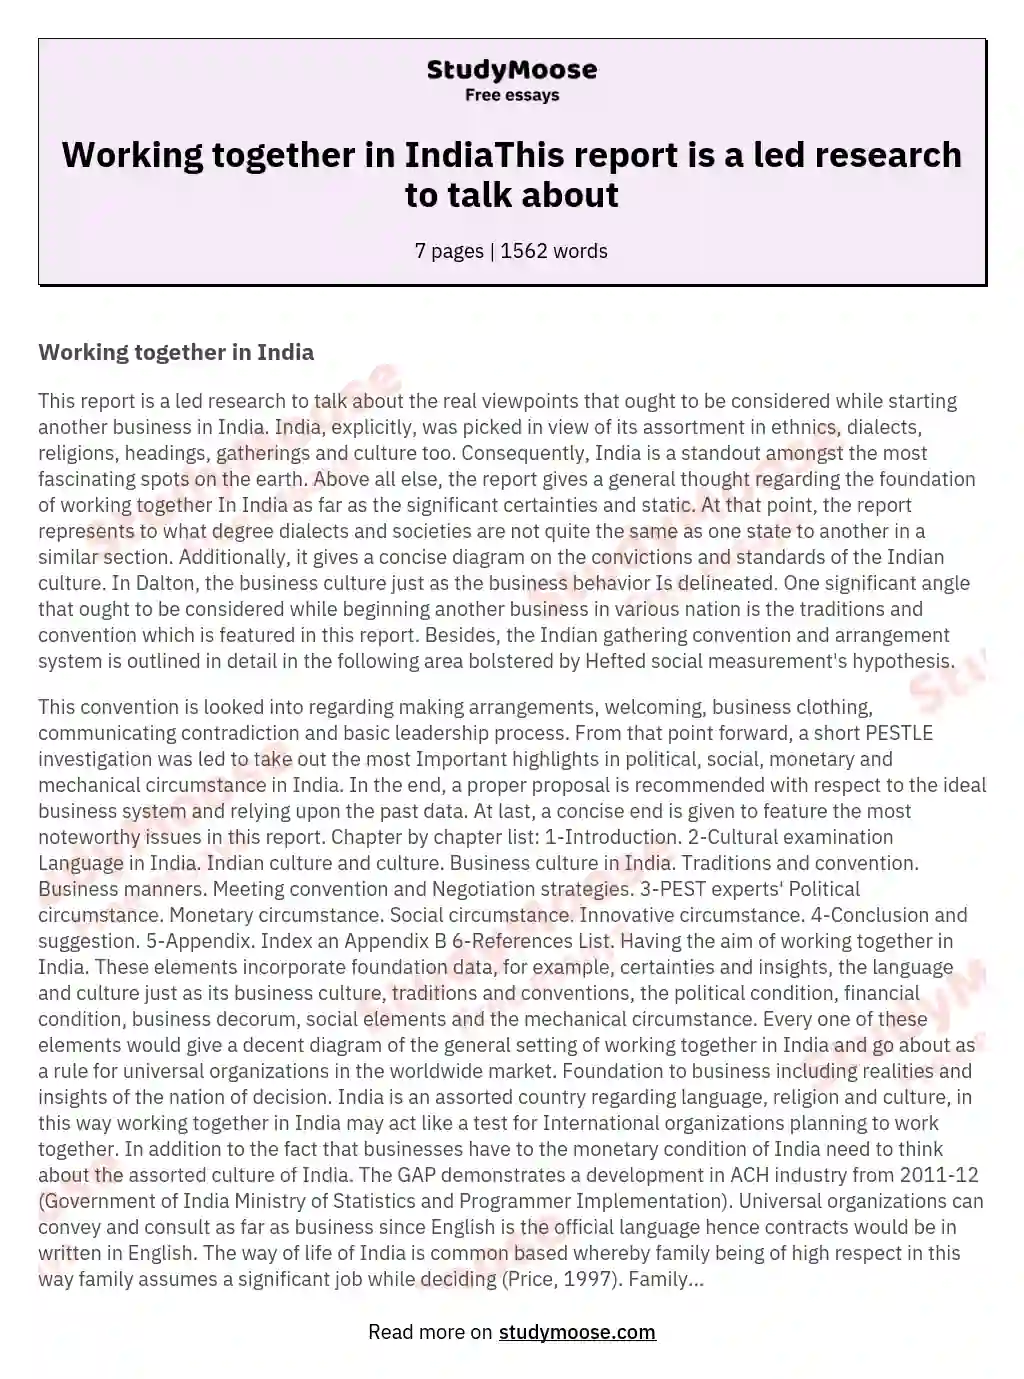 Working together in IndiaThis report is a led research to talk about